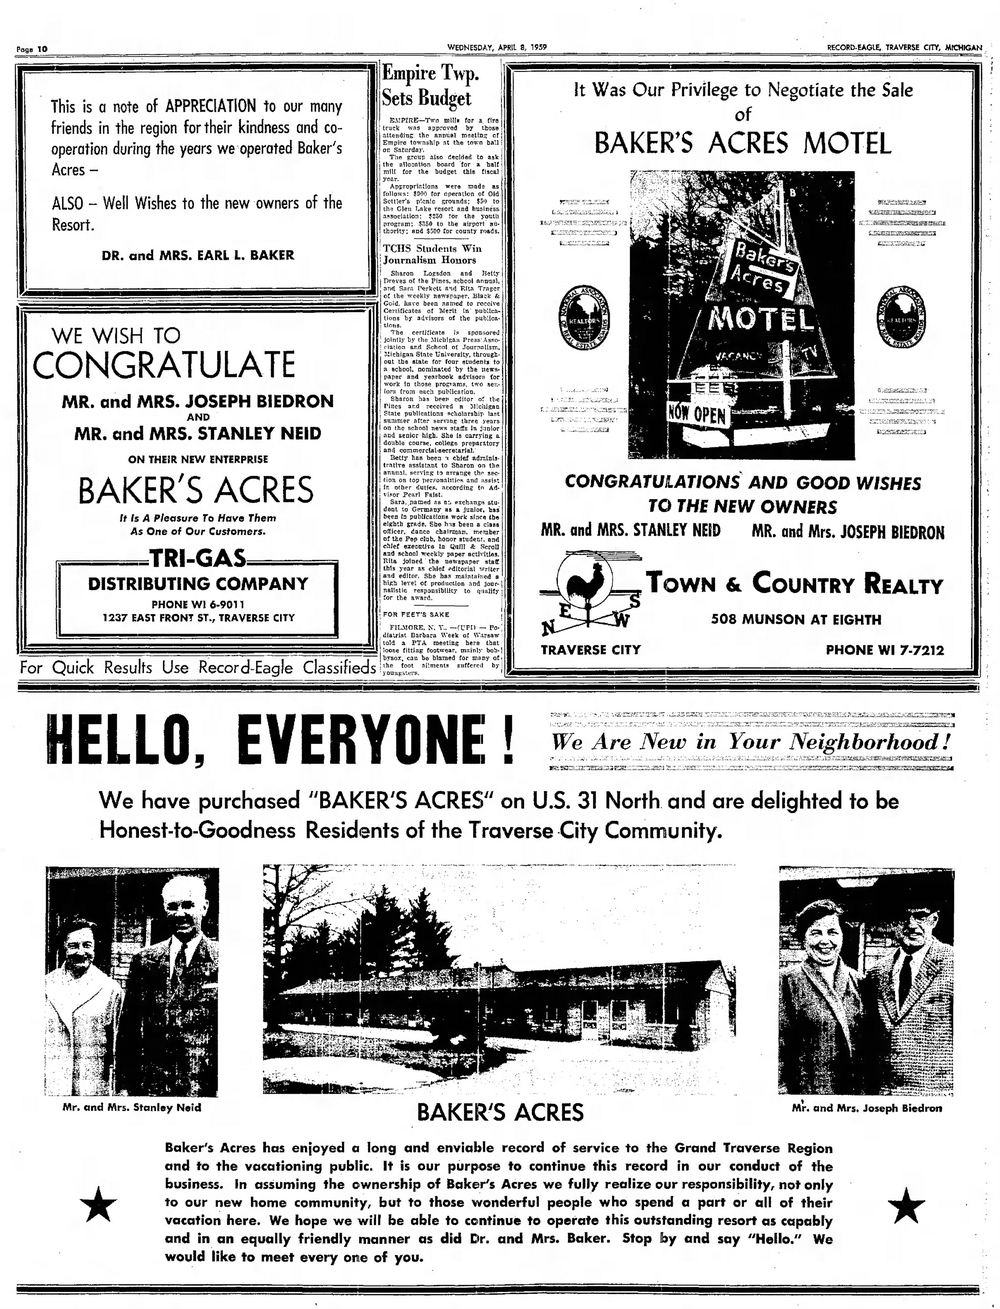 Bakers Acres Motel and Cottages (Waterfront Inn, Tamarack Lodge) - April 1959 Opening Article And Ads